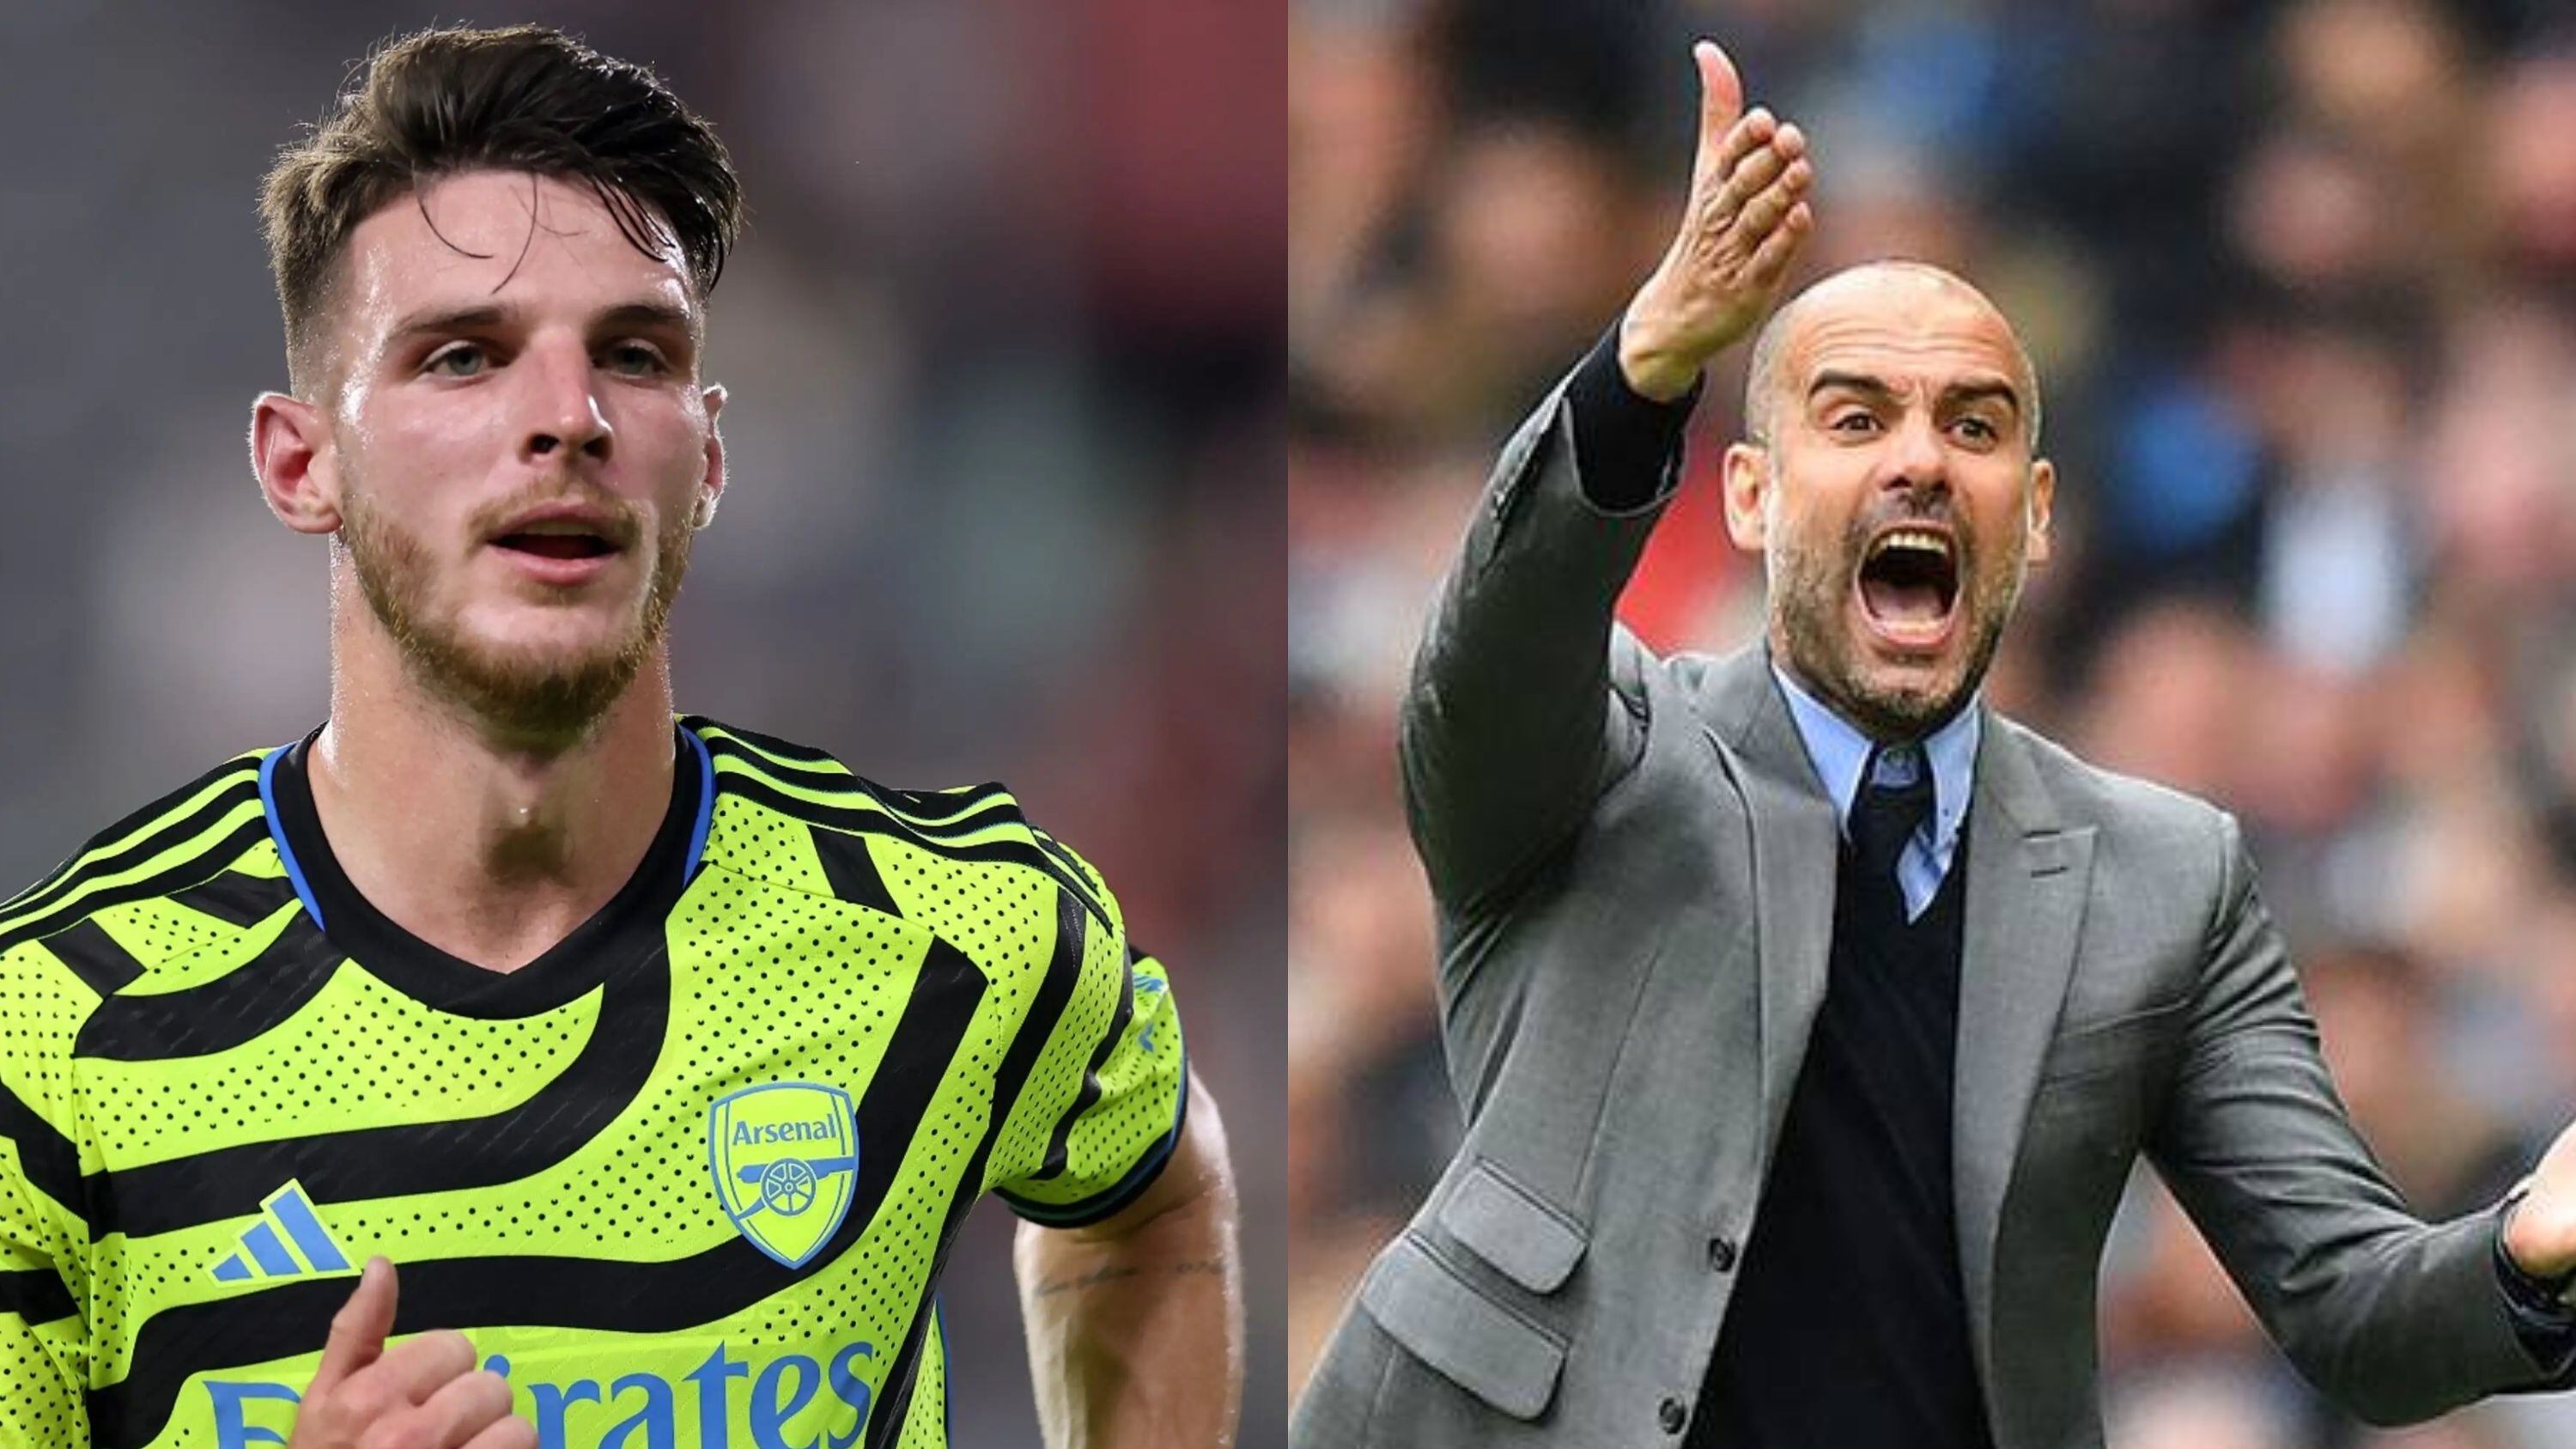 For this reason Declan Rice did not want to play in Pep Guardiola's Manchester City